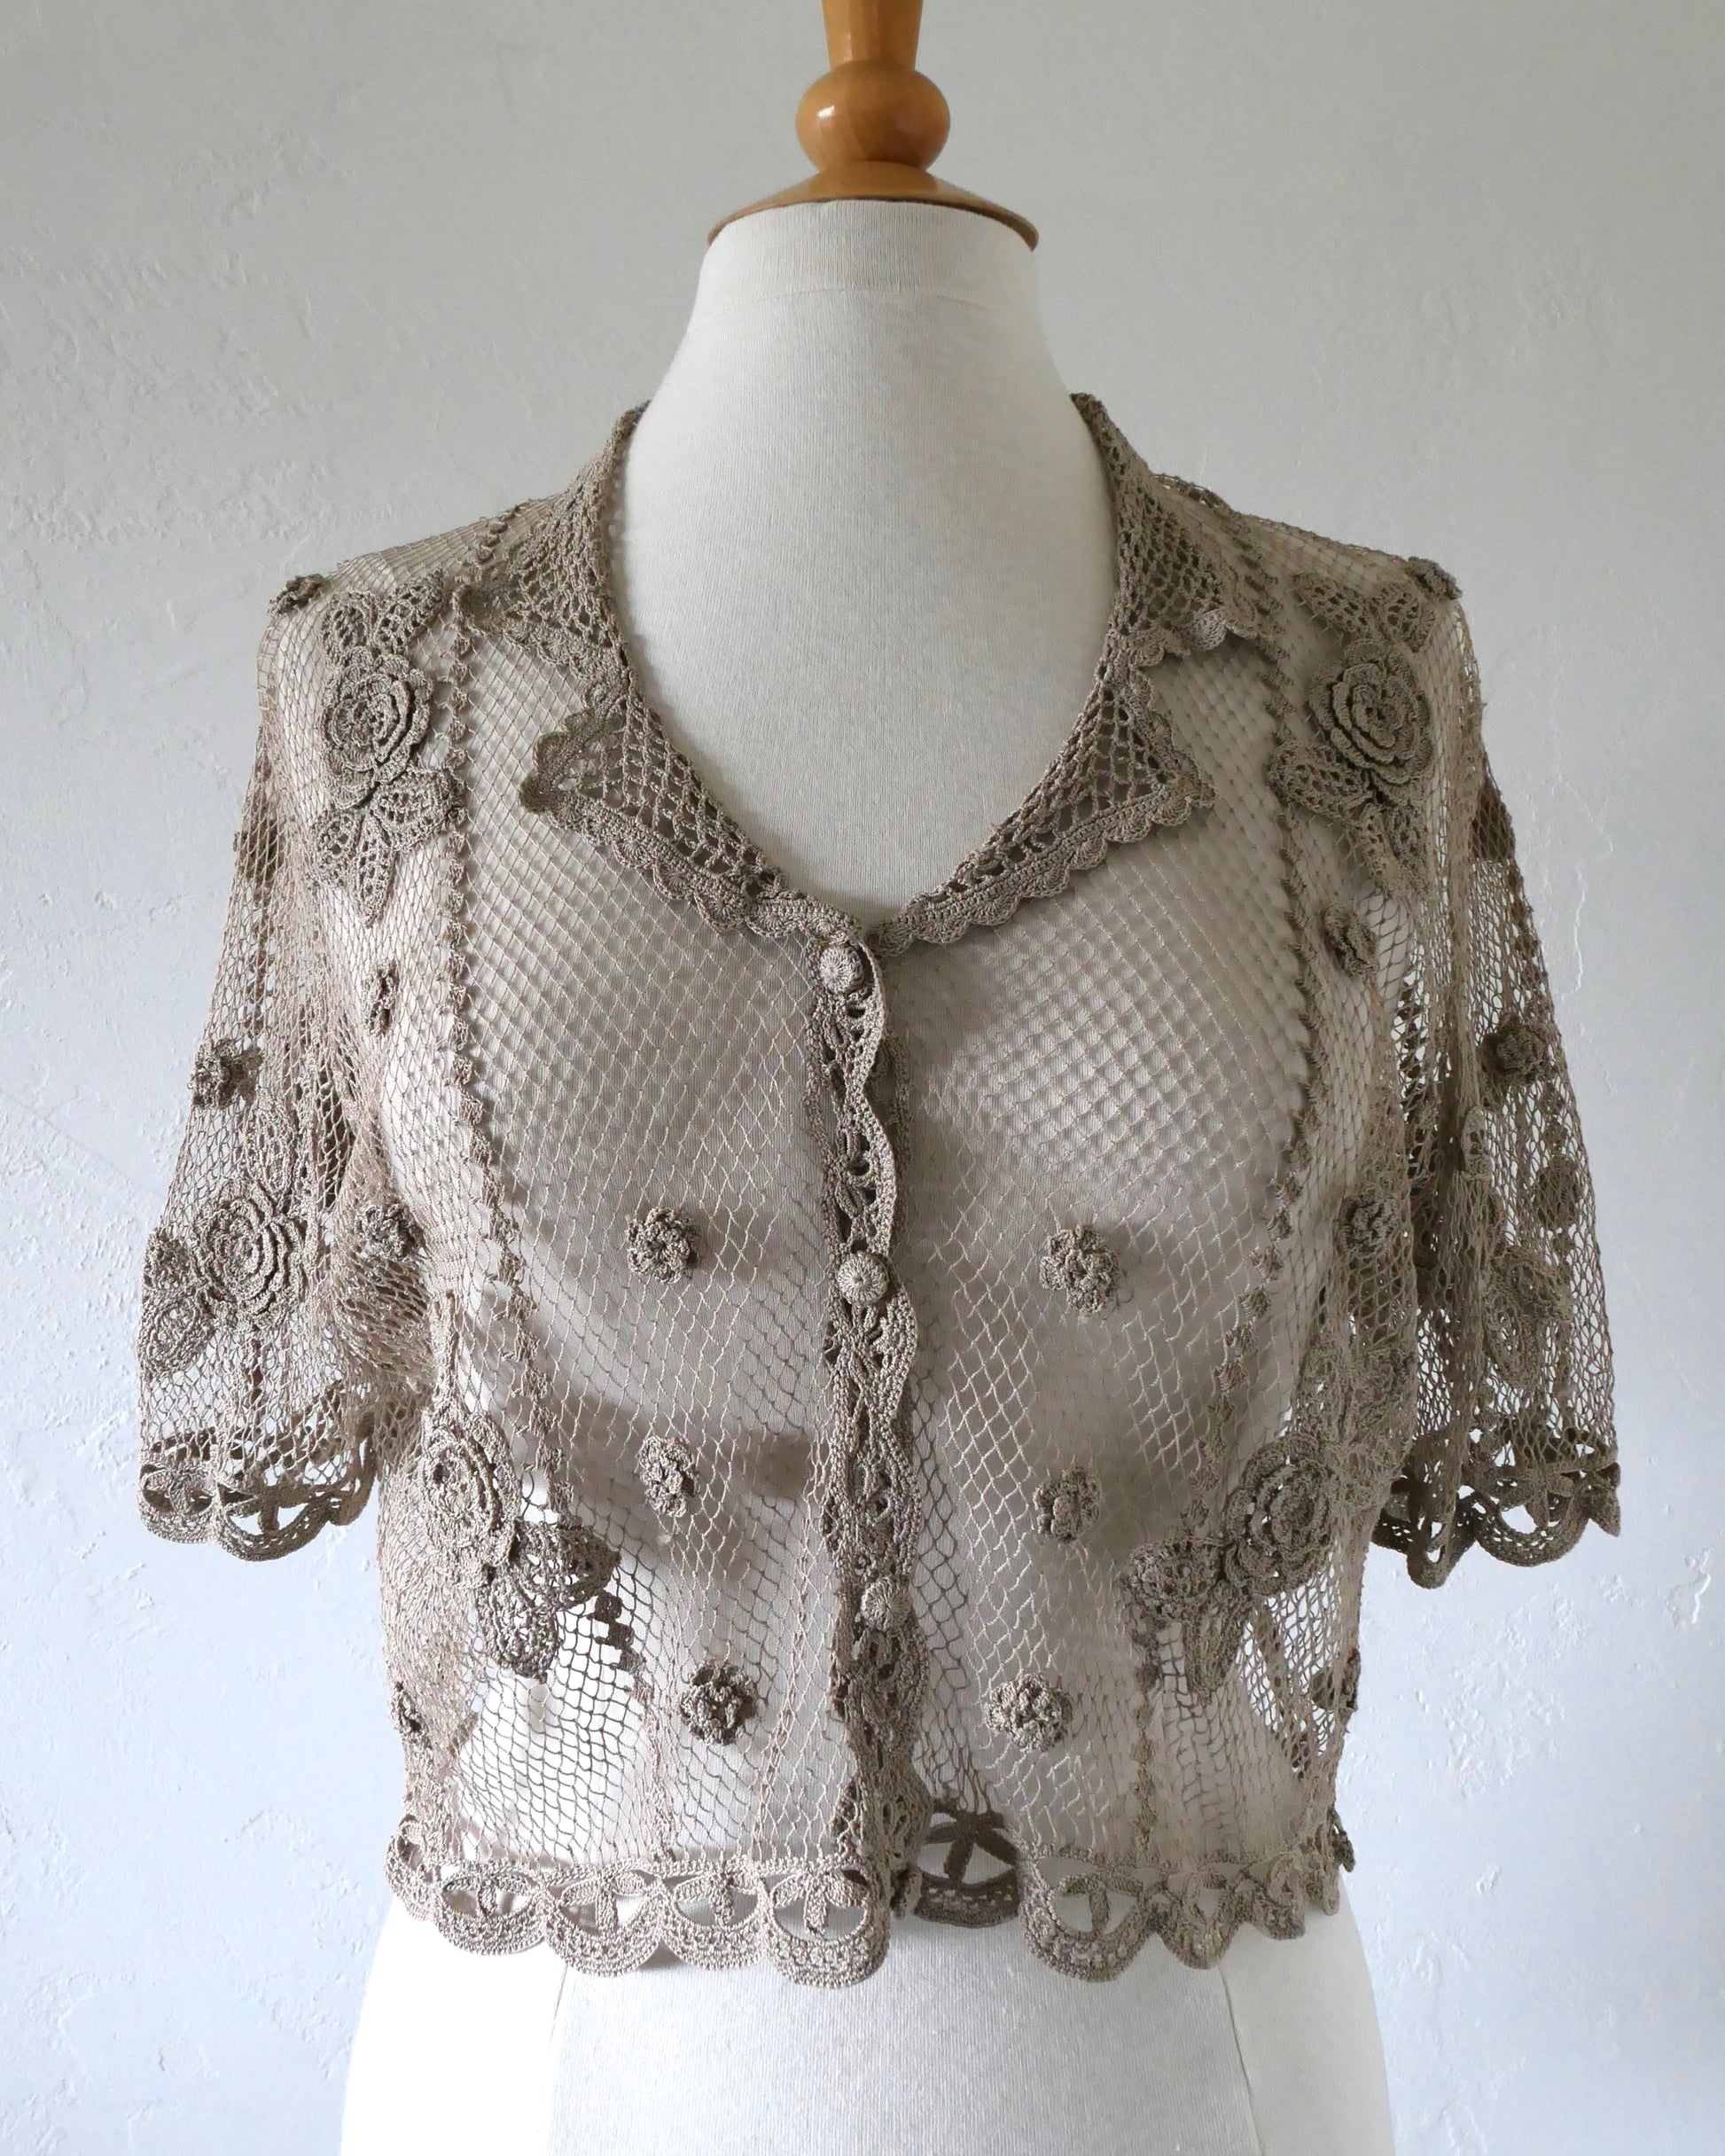 Lim's VIntage taupe colored cropped crochet cardigan with carnation floral motif, notched collar, and scalloped edging around sleeve hem and bottom hem. One size.